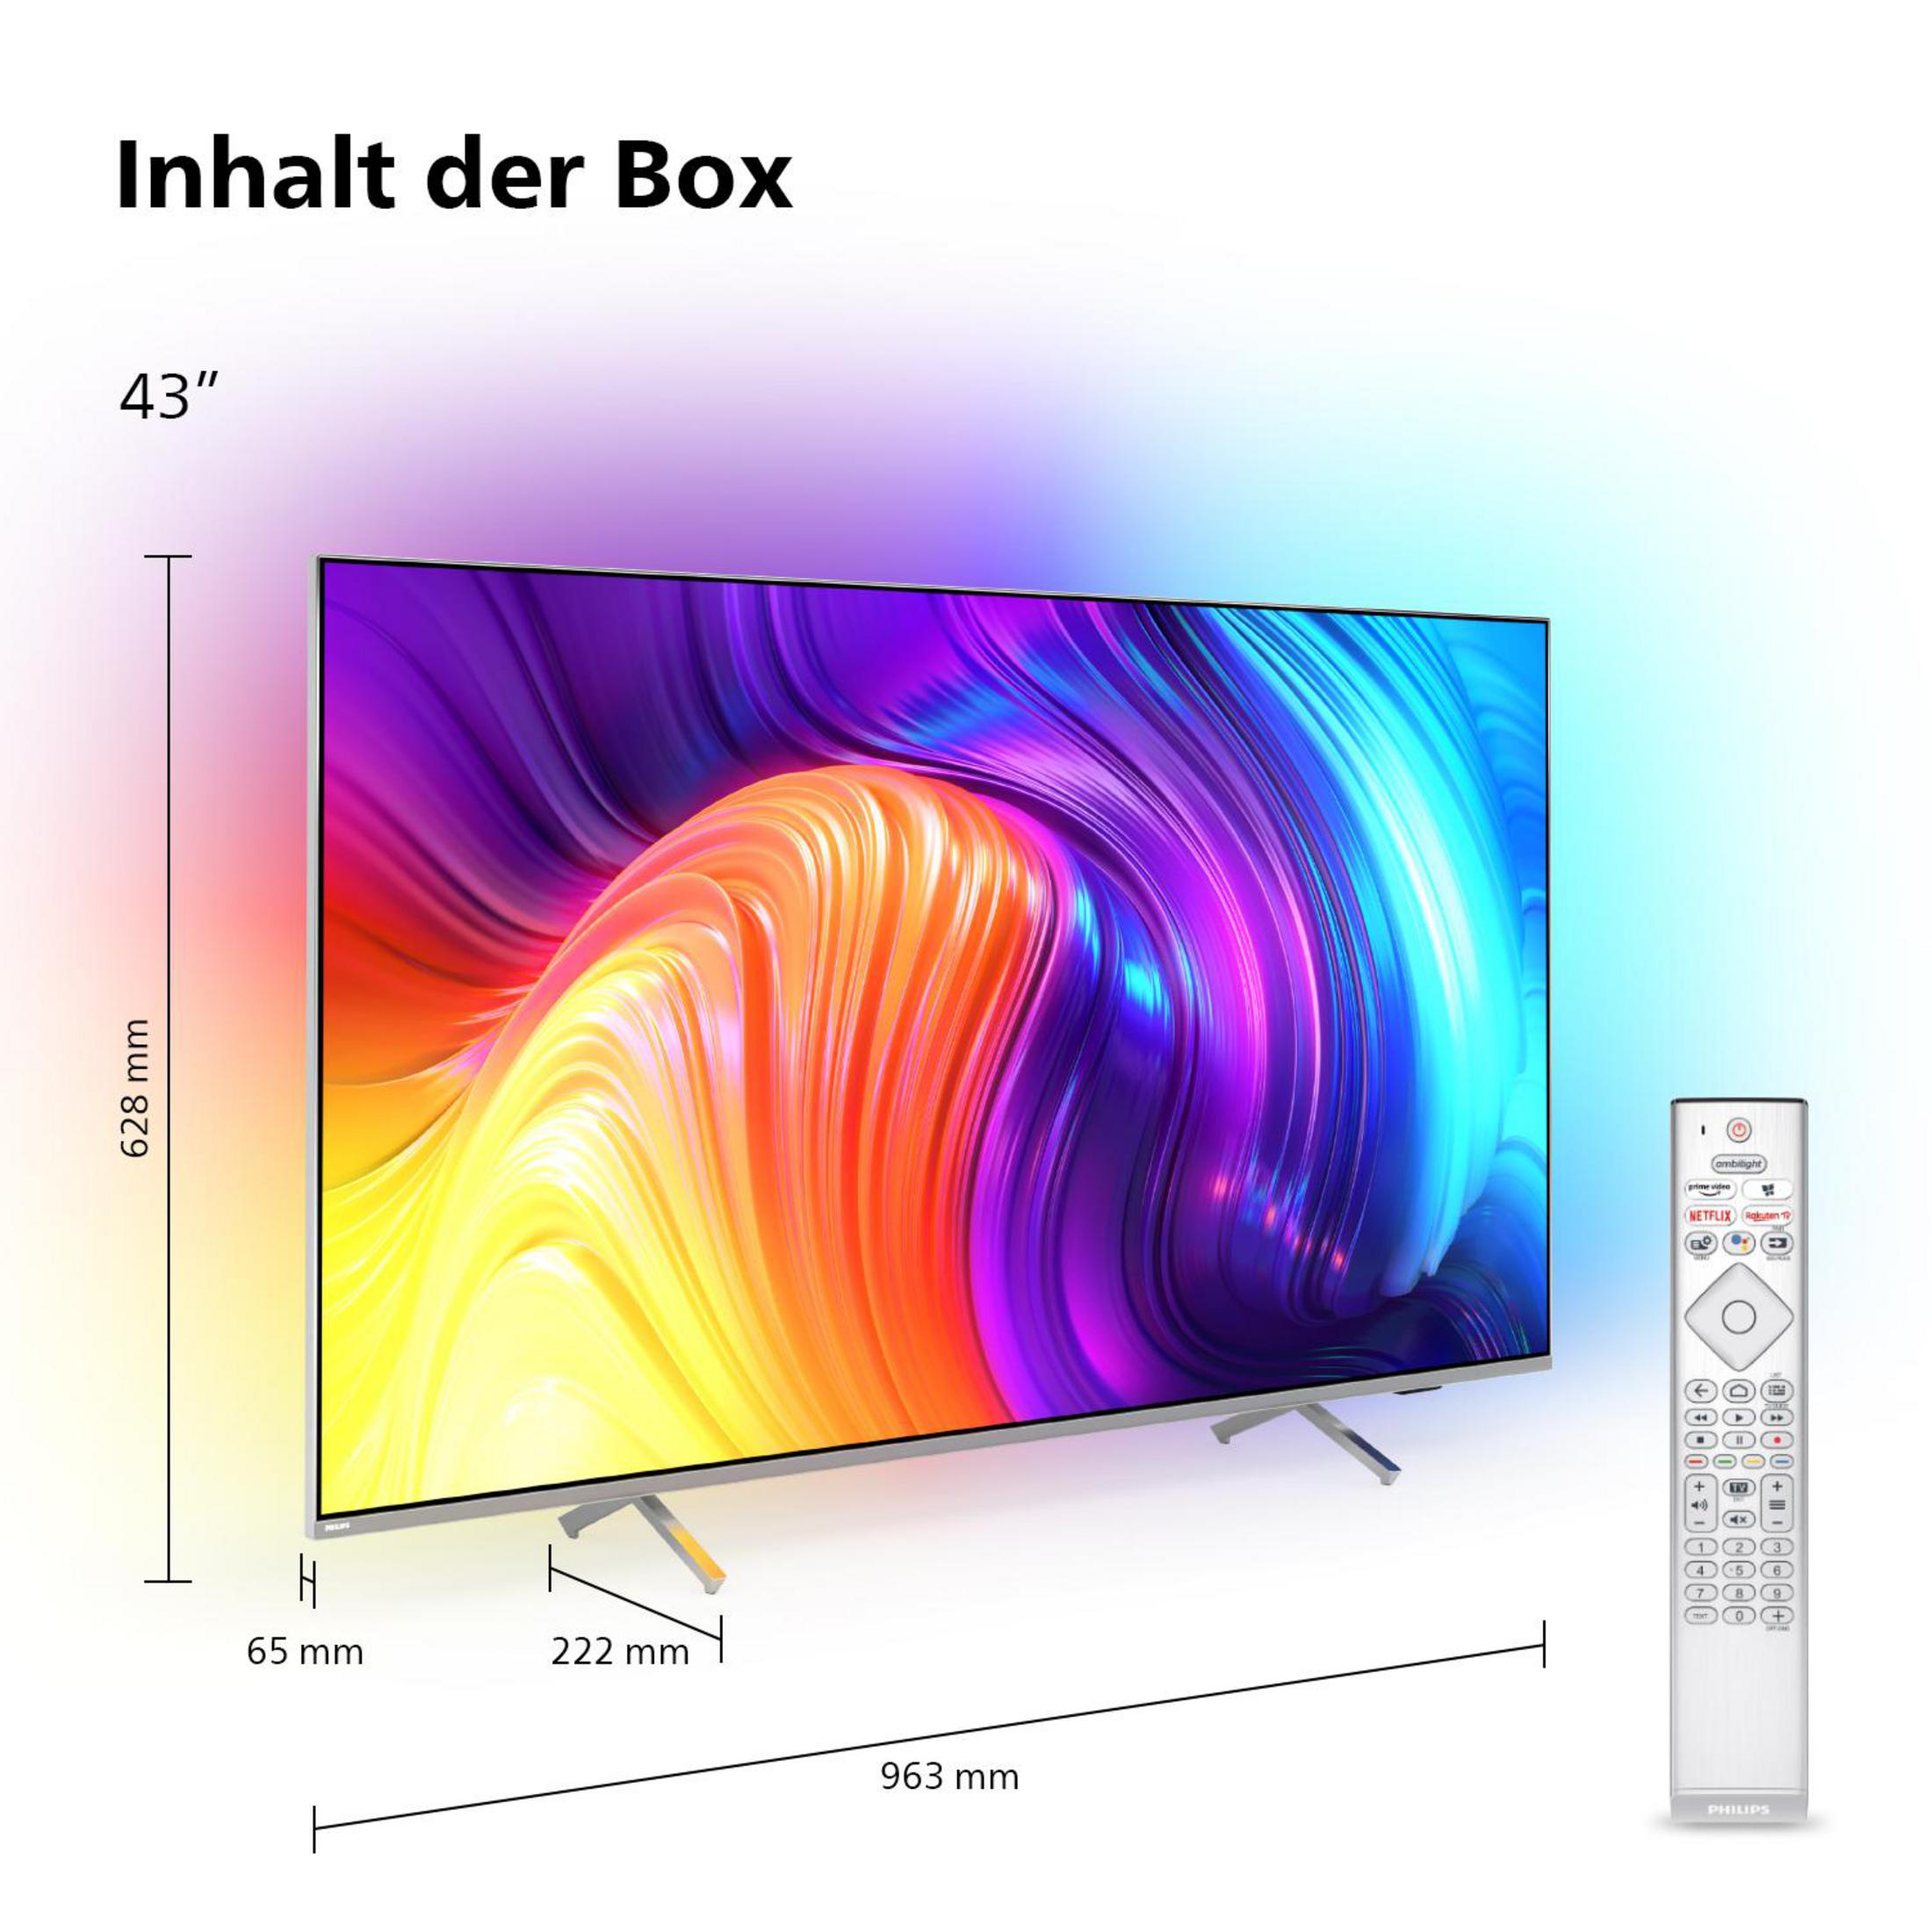 PUS LED 109,22 43 / 11 (Flat, UHD PHILIPS TV cm, 4K, 43 8507/12 Zoll (R)) TV™ Ambilight, Android